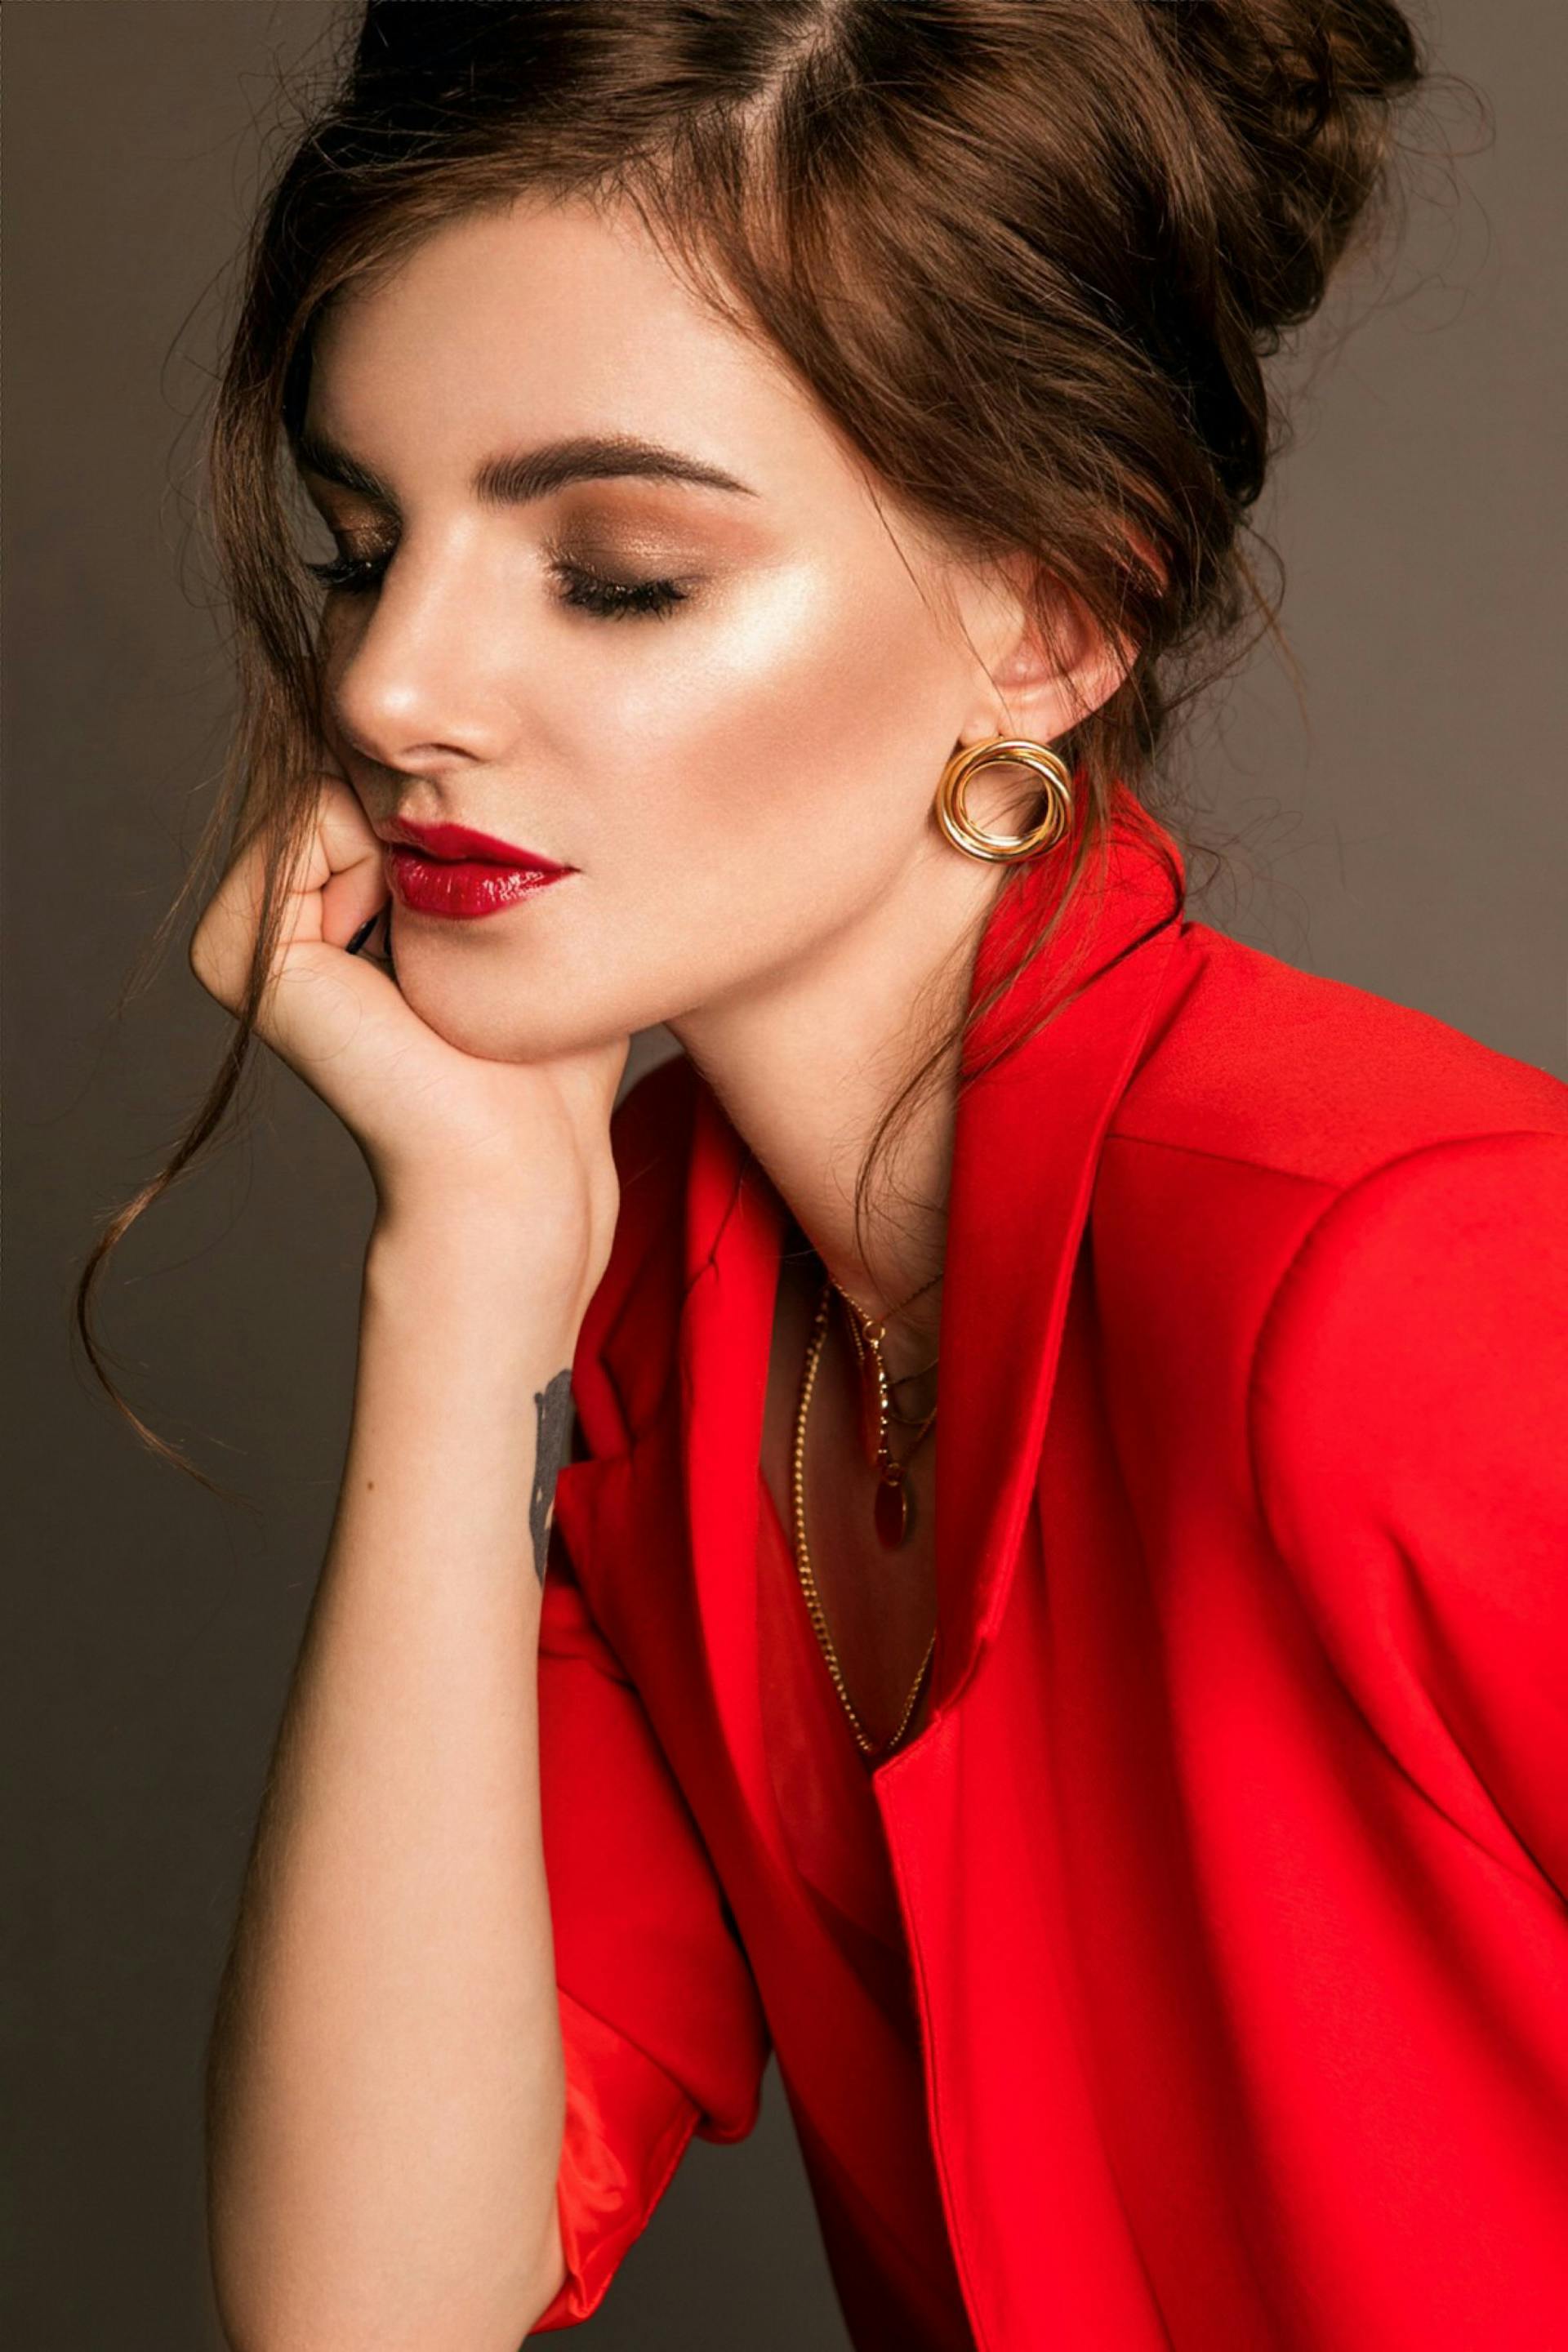 A woman wearing red lipstick | Source: Pexels